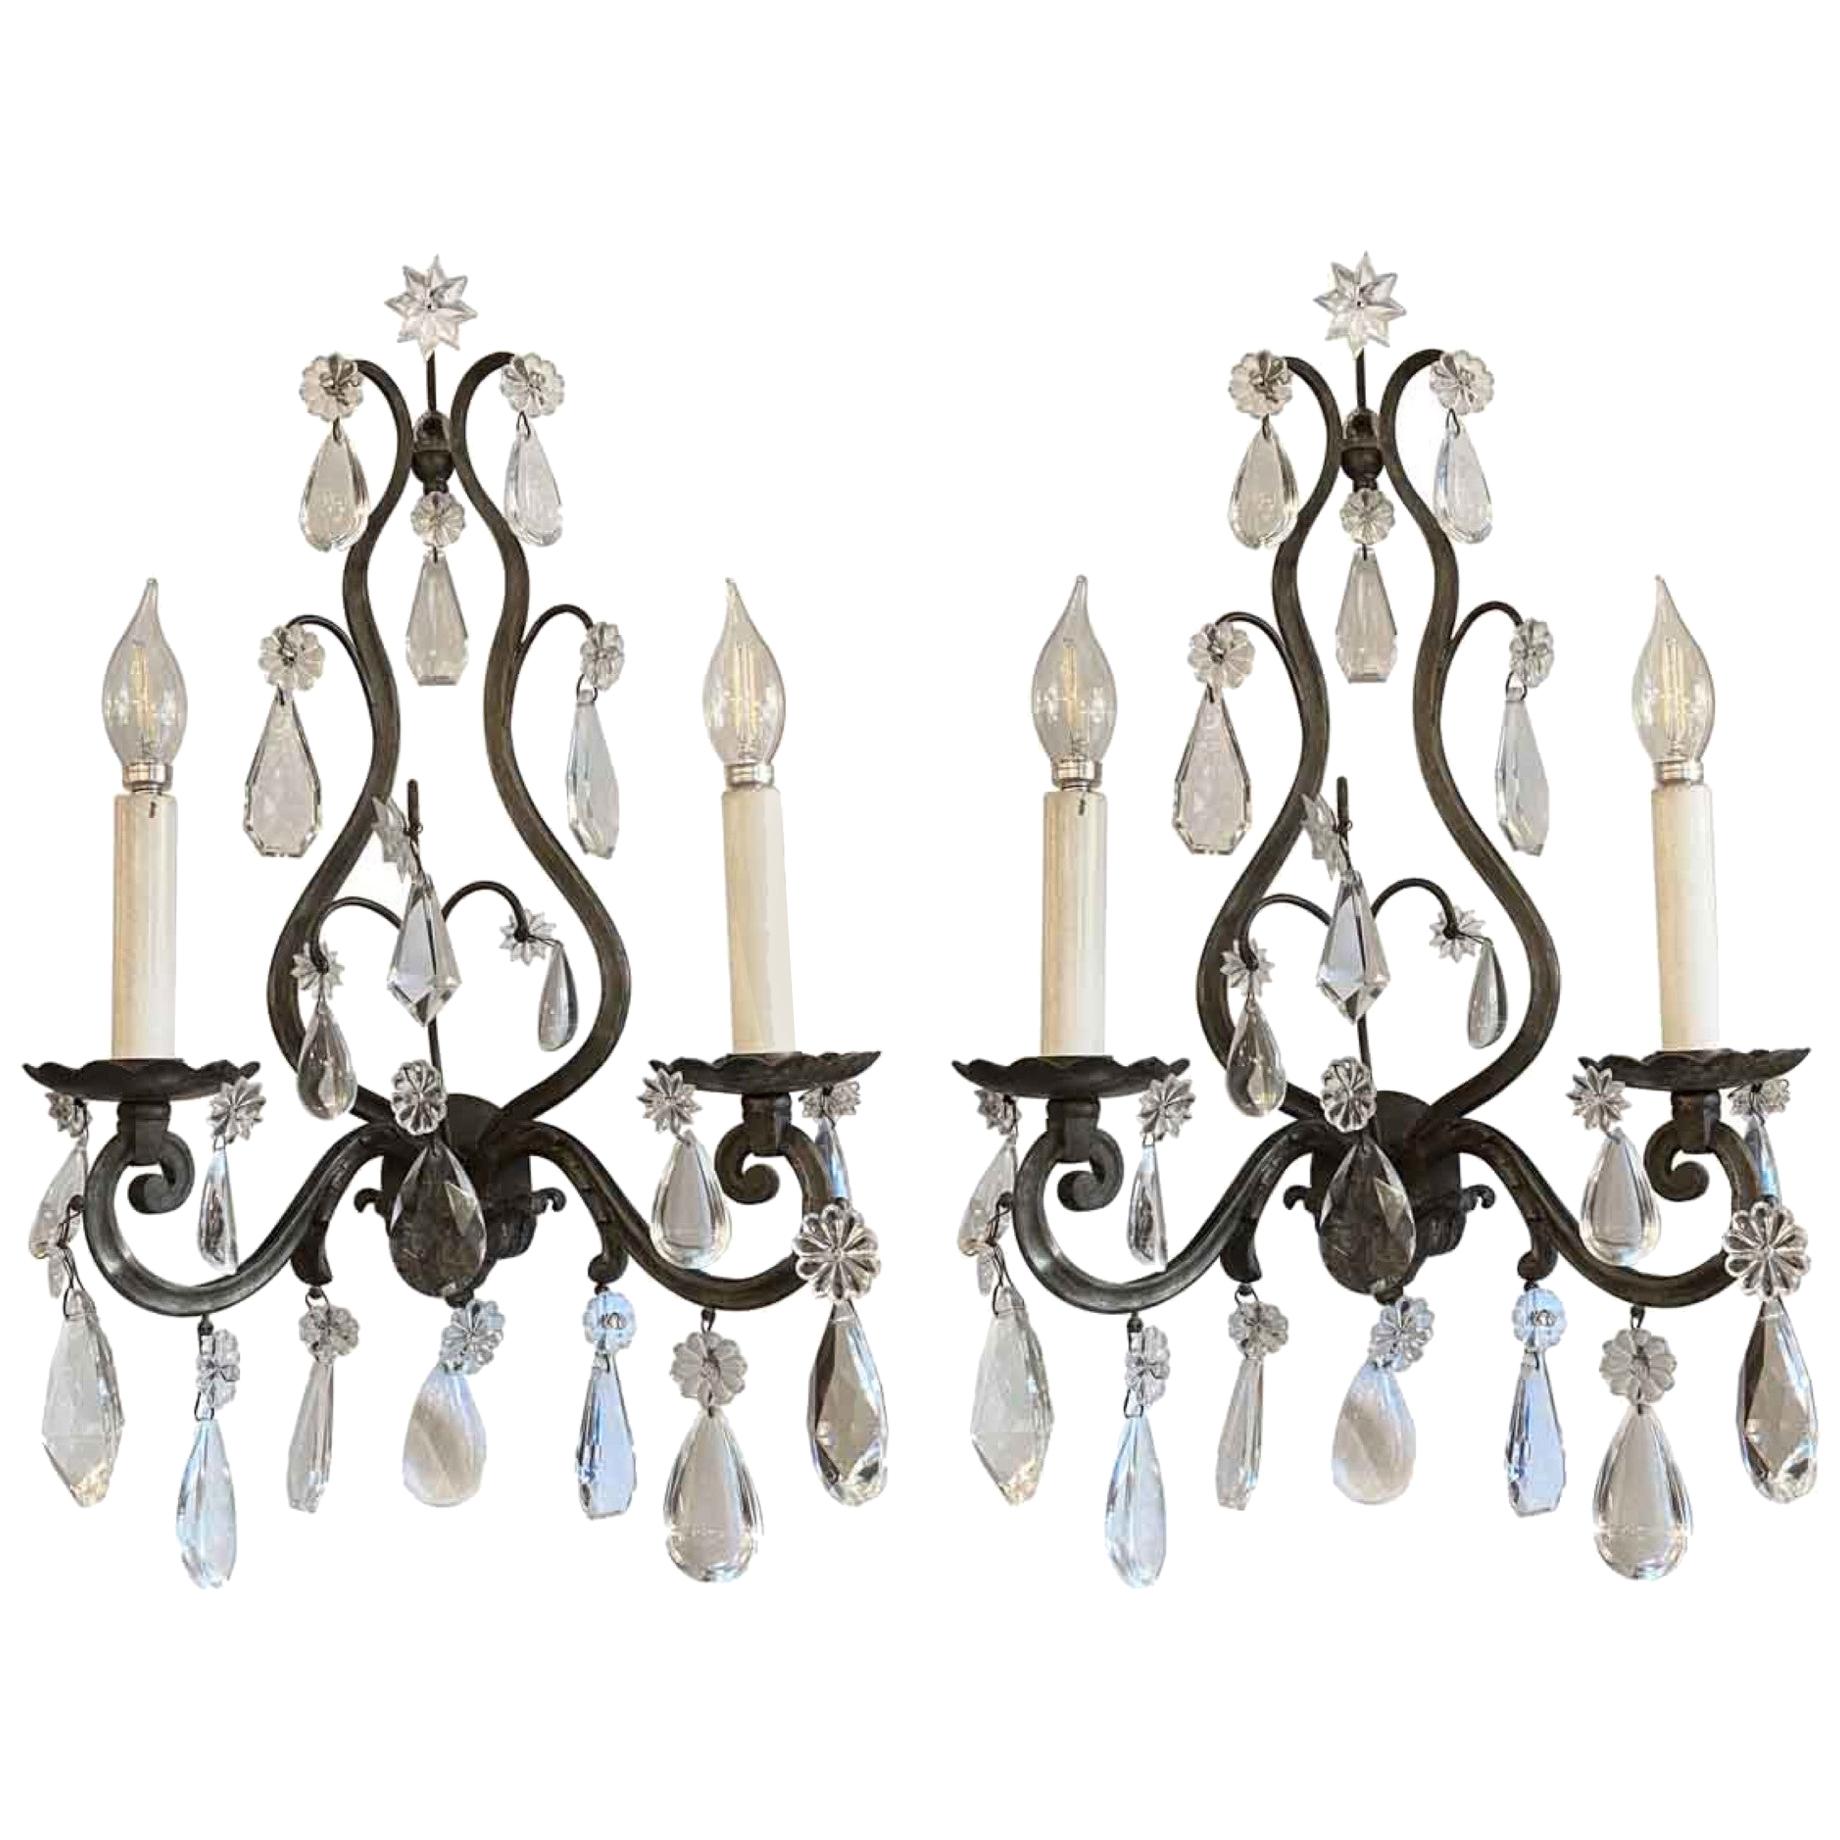 1920s Pair of Elegant French Wall Sconces in Bronze with Complementary Crystals